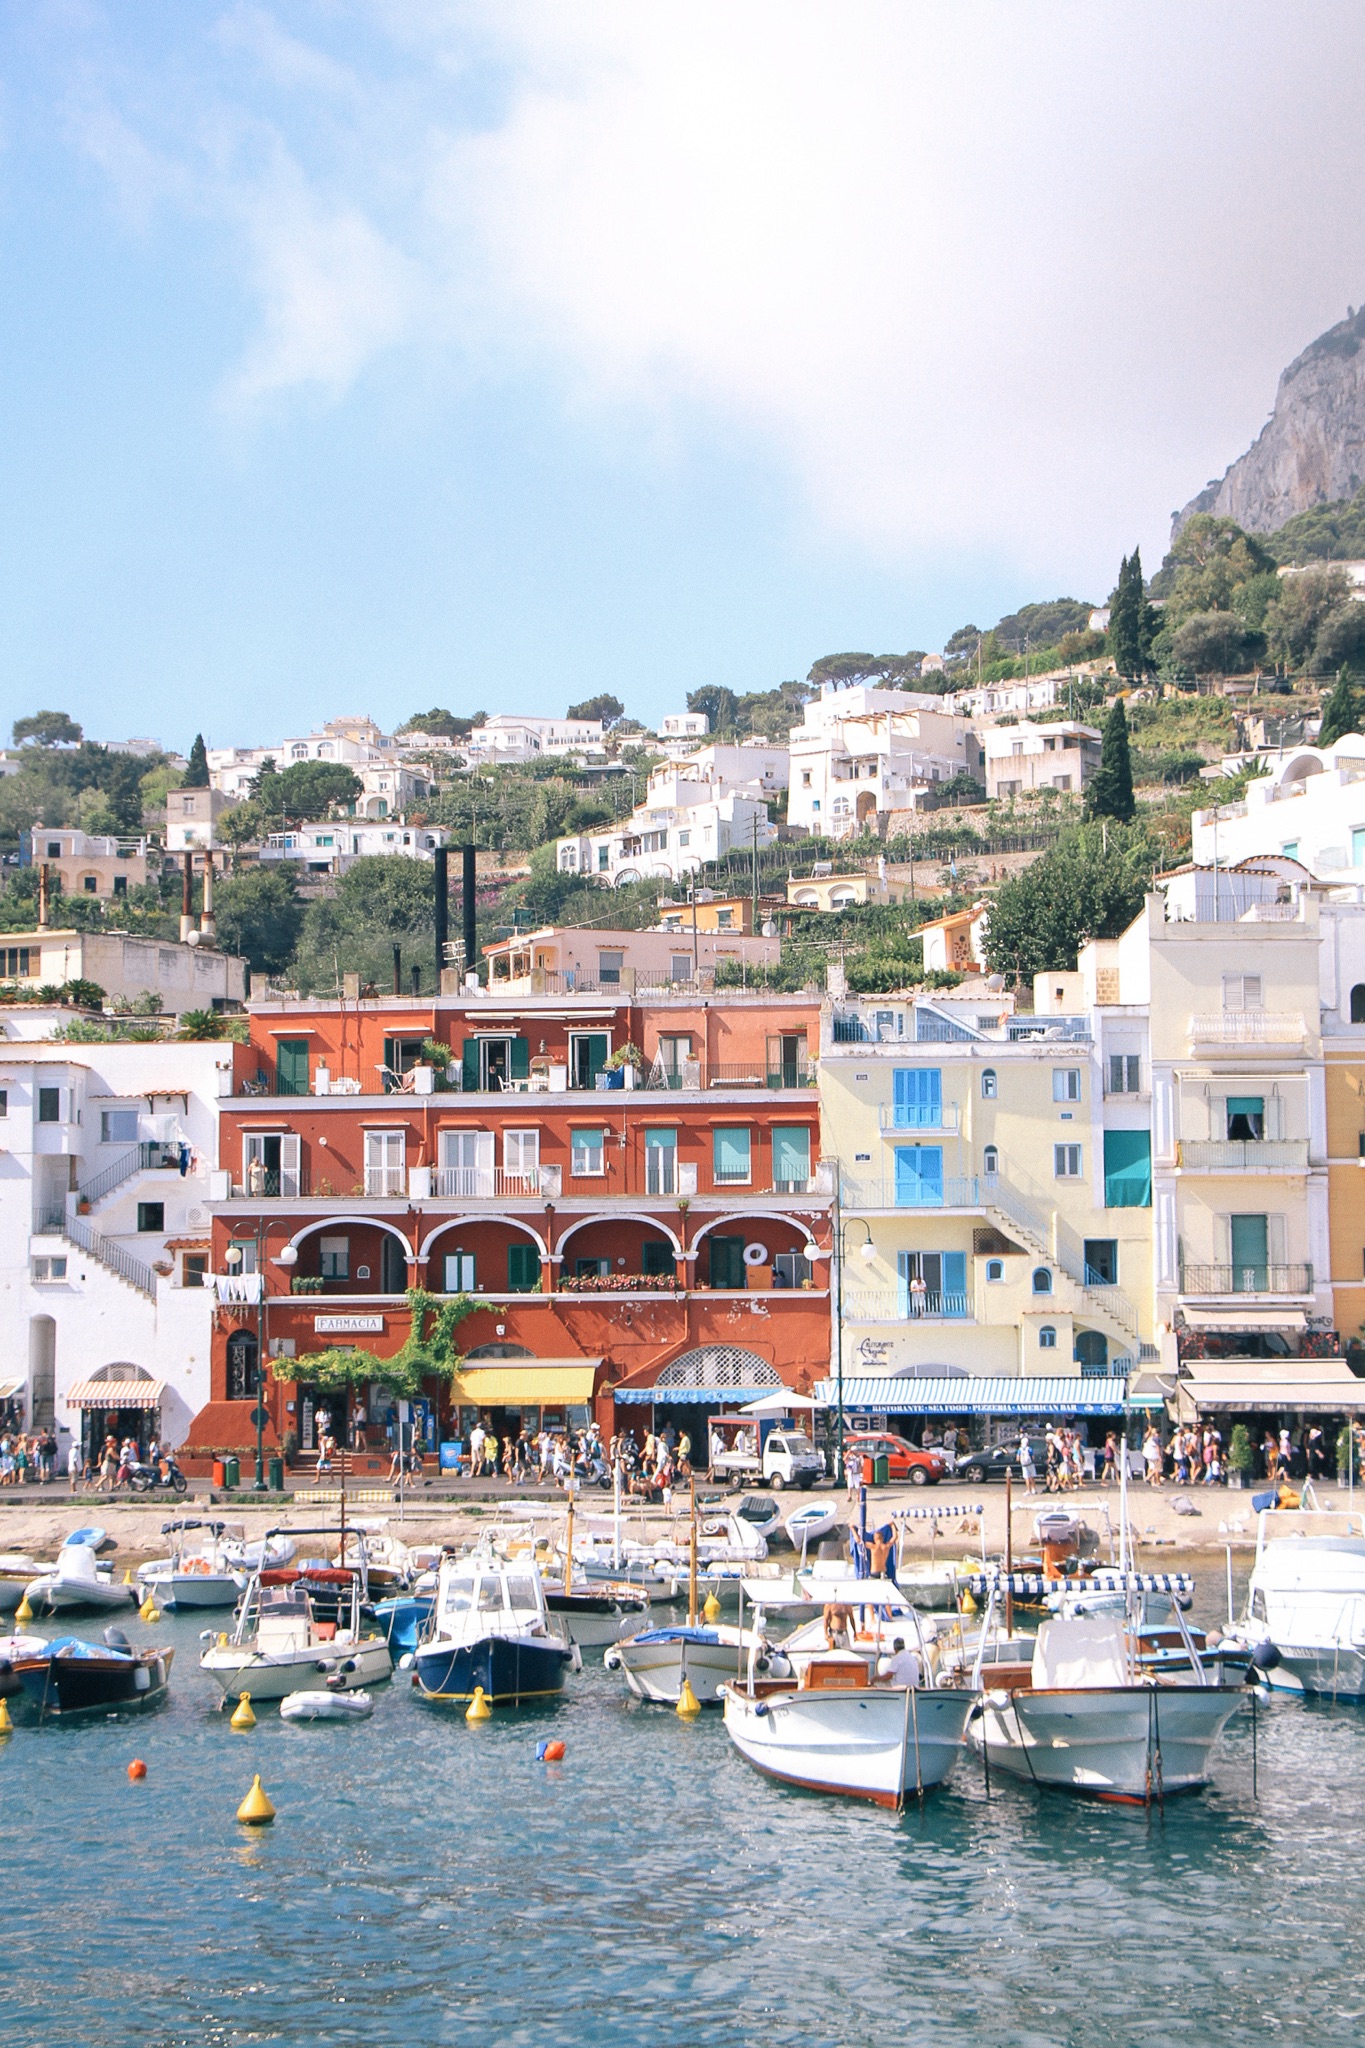 How to Spend One Day in Capri, Italy